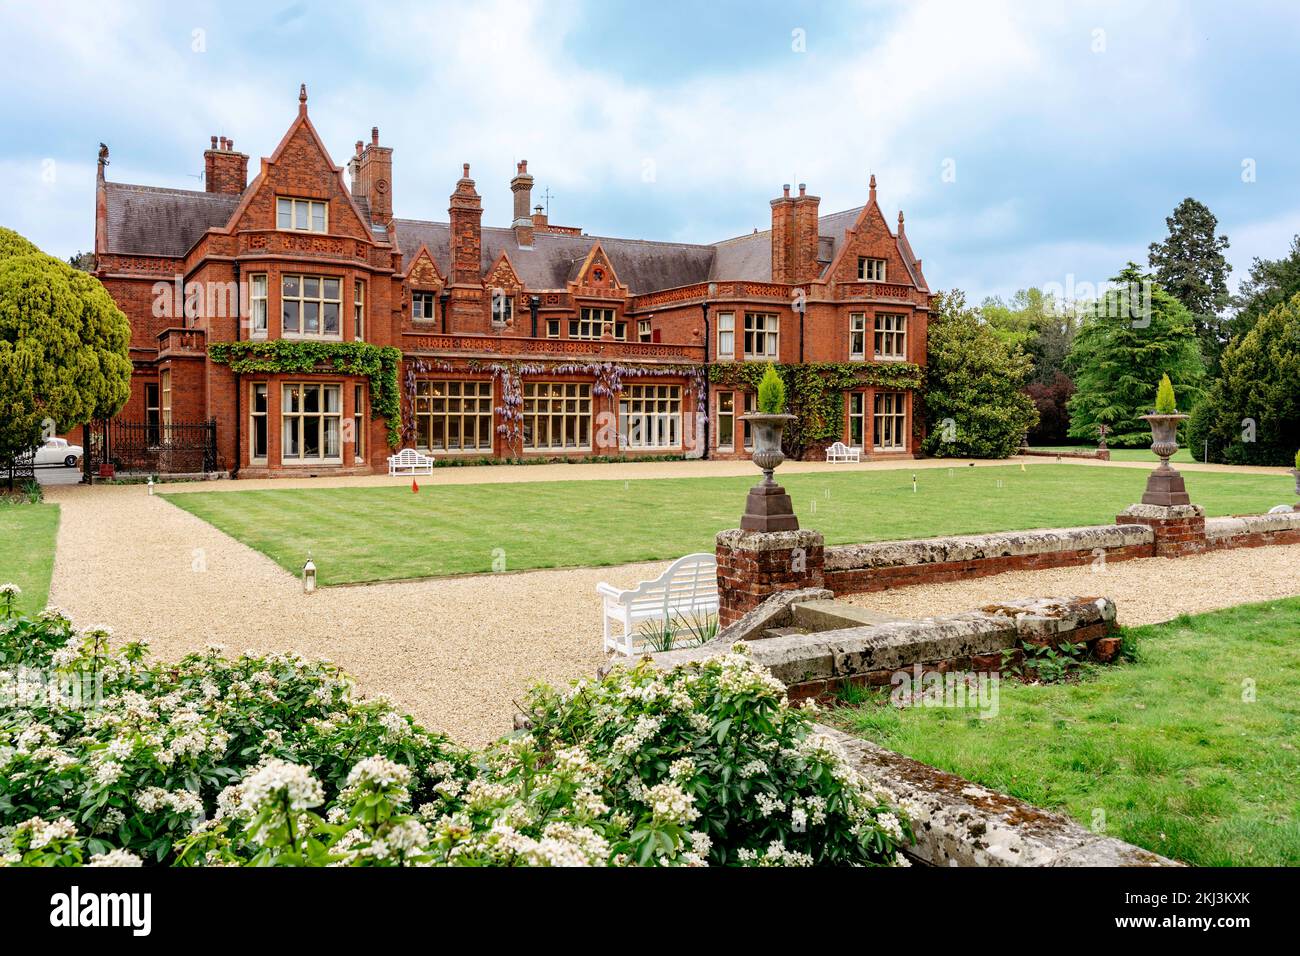 Large English manor house with landscaped lawn Stock Photo